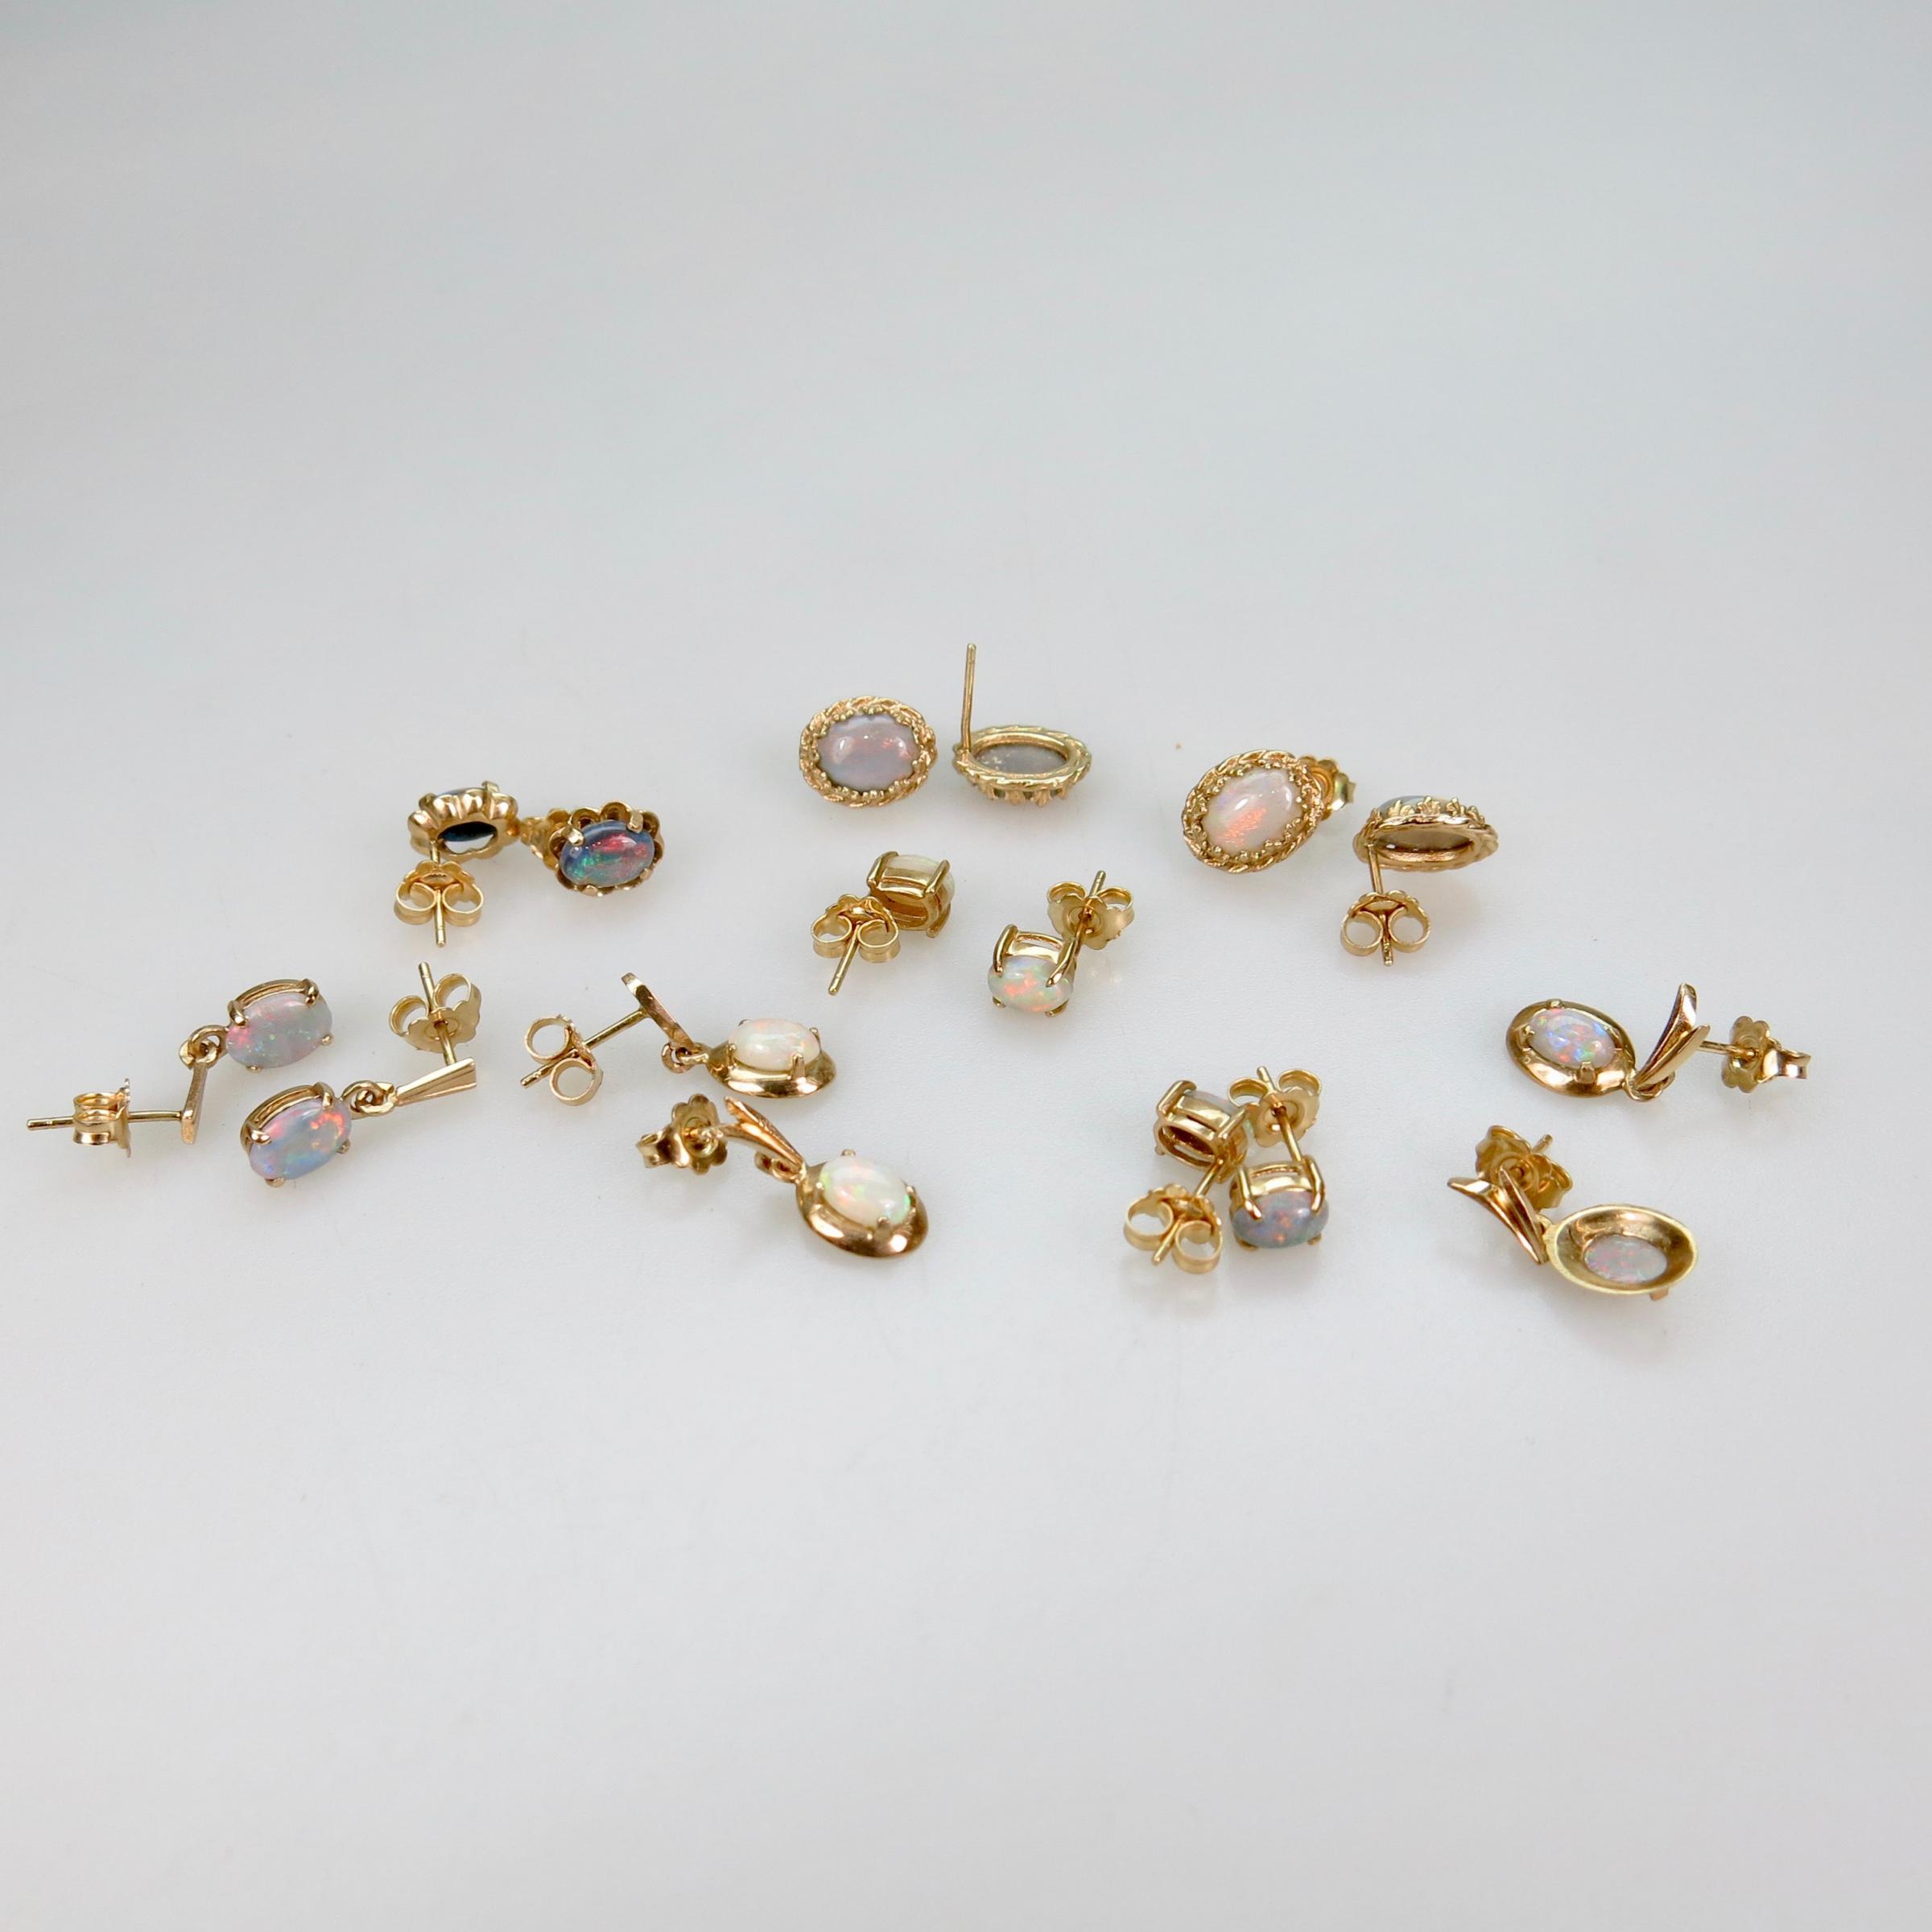 8 Pairs of Small Yellow Gold Earrings